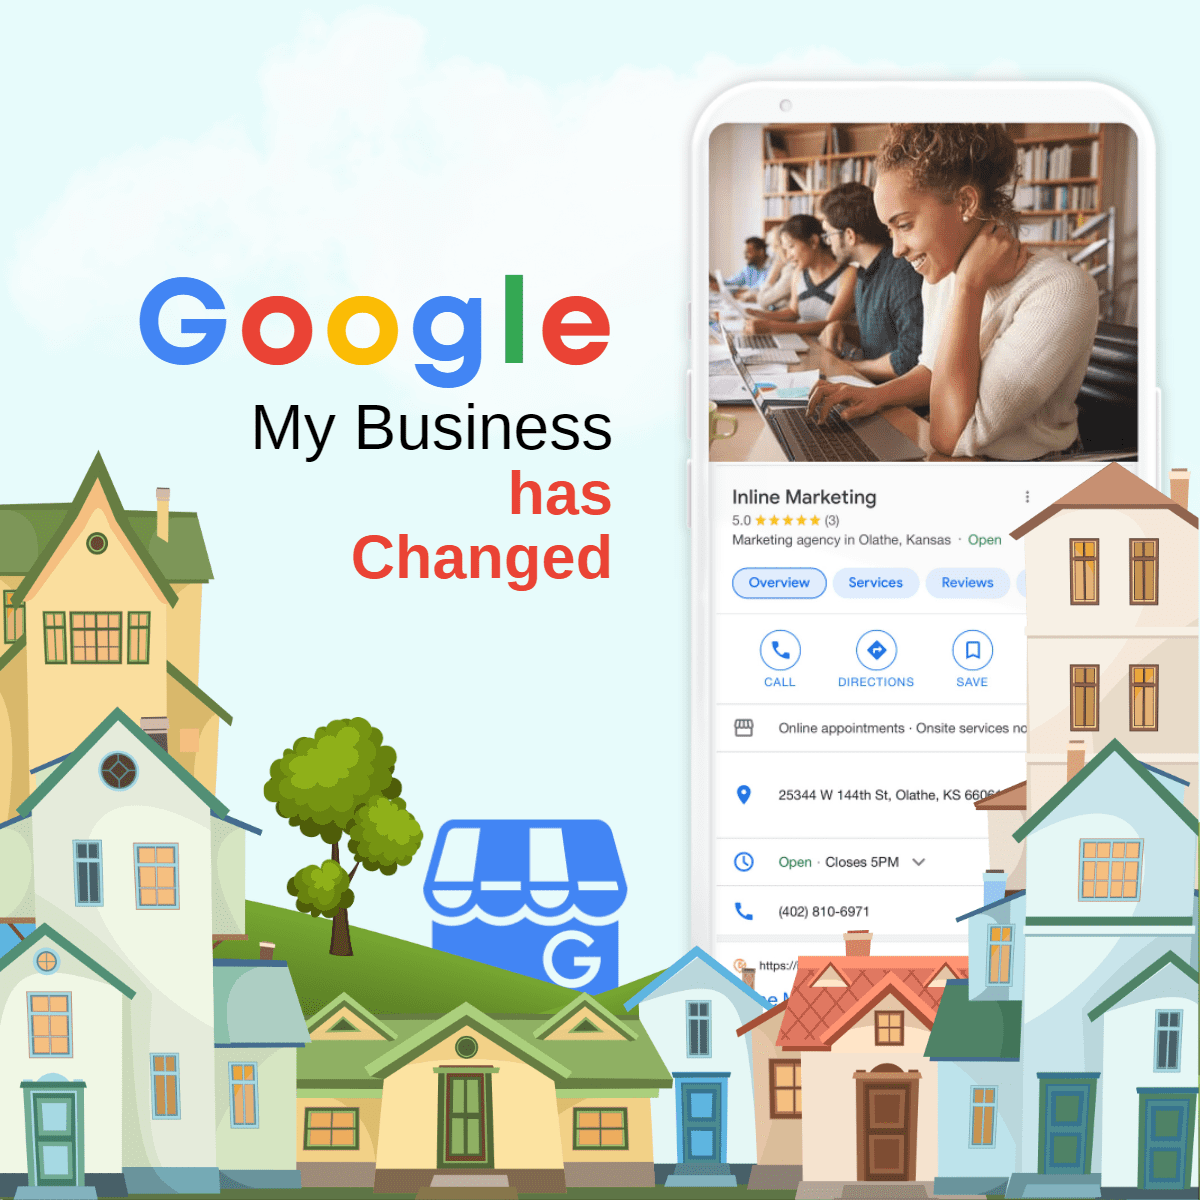 Cartoon homes surround the Google My Business logo on hills. A cell phone to the right displays Inline Marketing's Google Business Profile. Words in the center of the image say, "Google My Business has Changed."